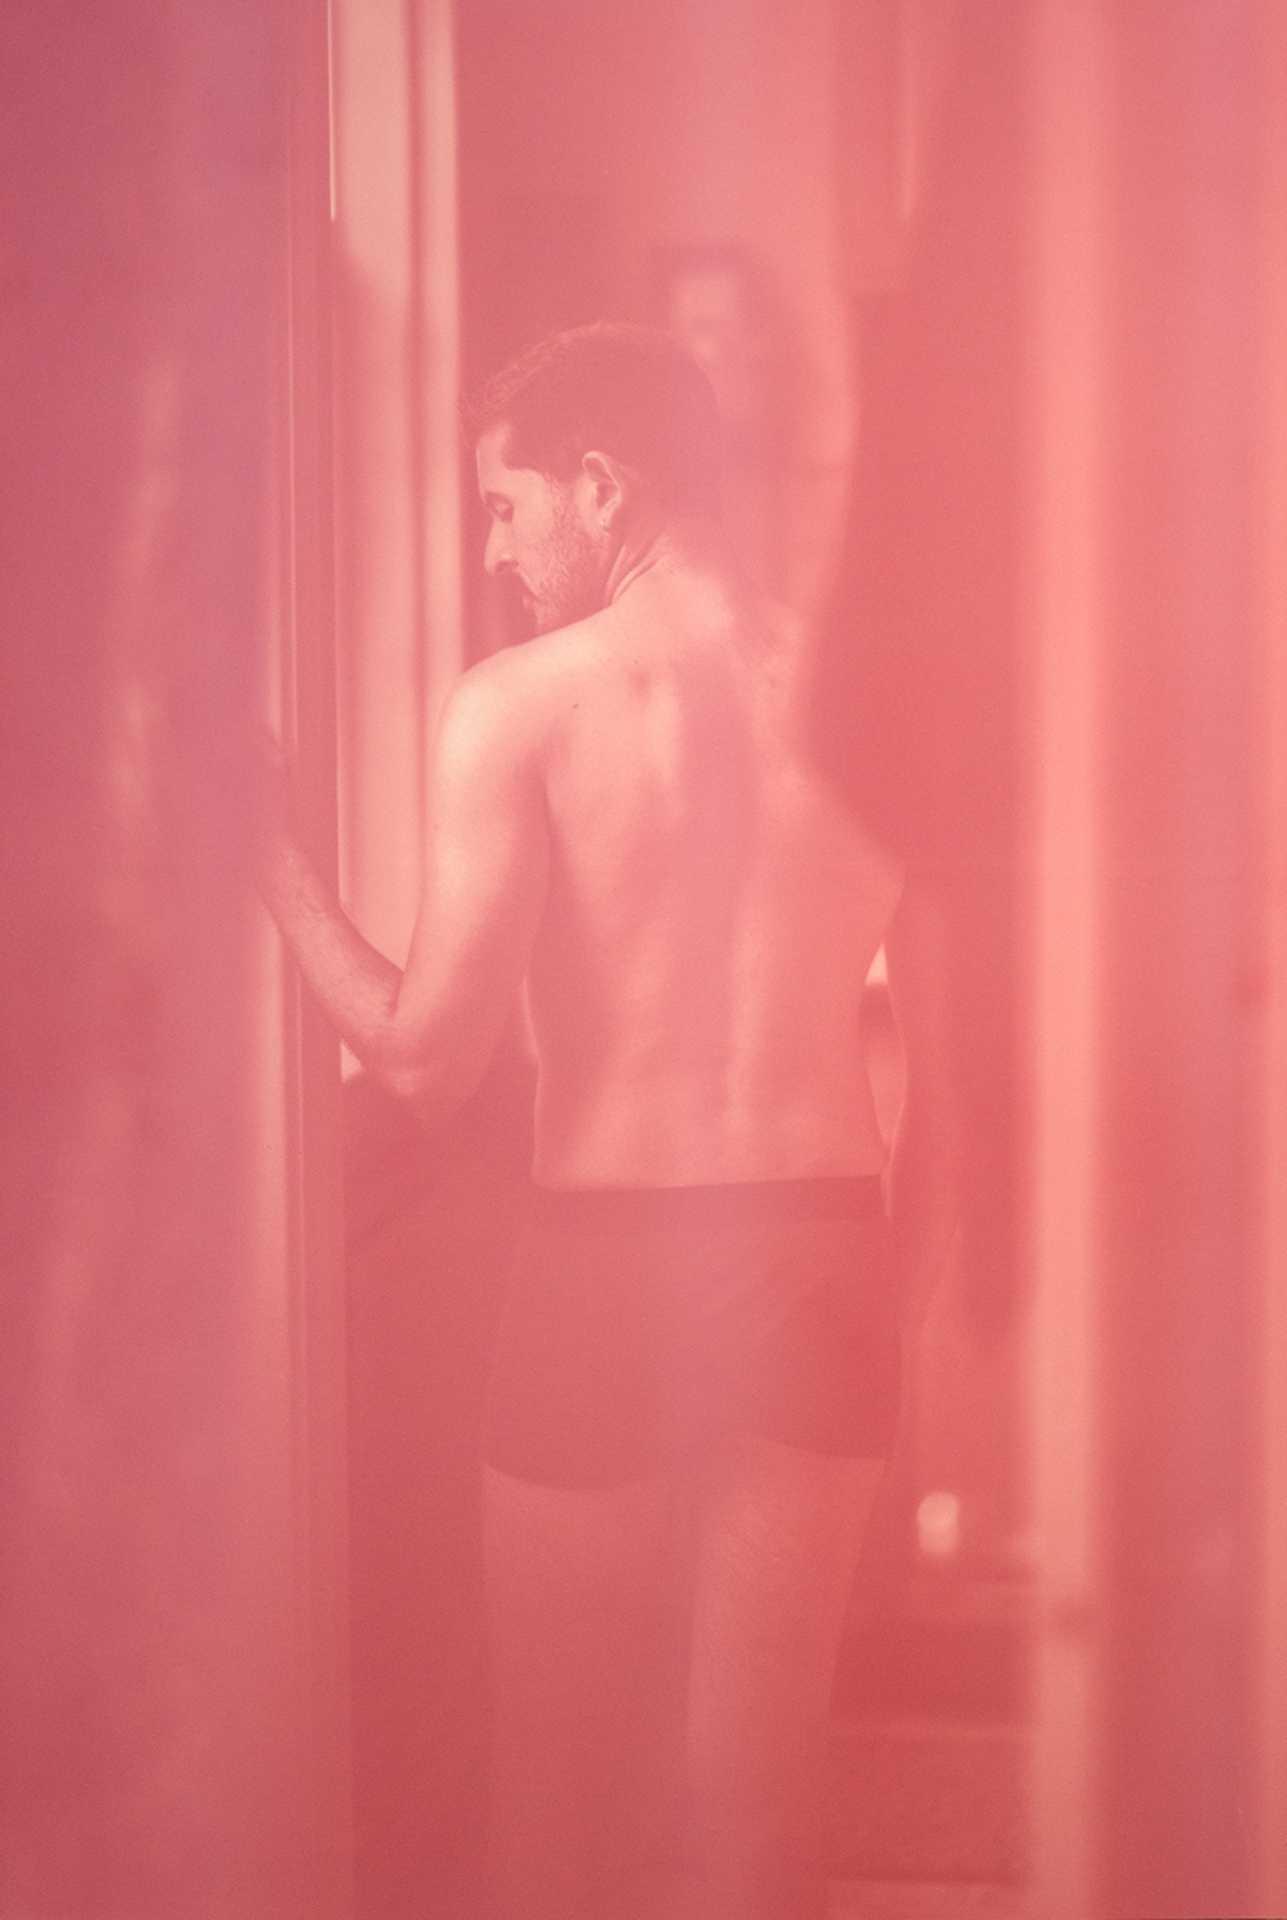 A man in underwear, seen from behind, glances back and leans one arm against a wall; the image has a pink tint.